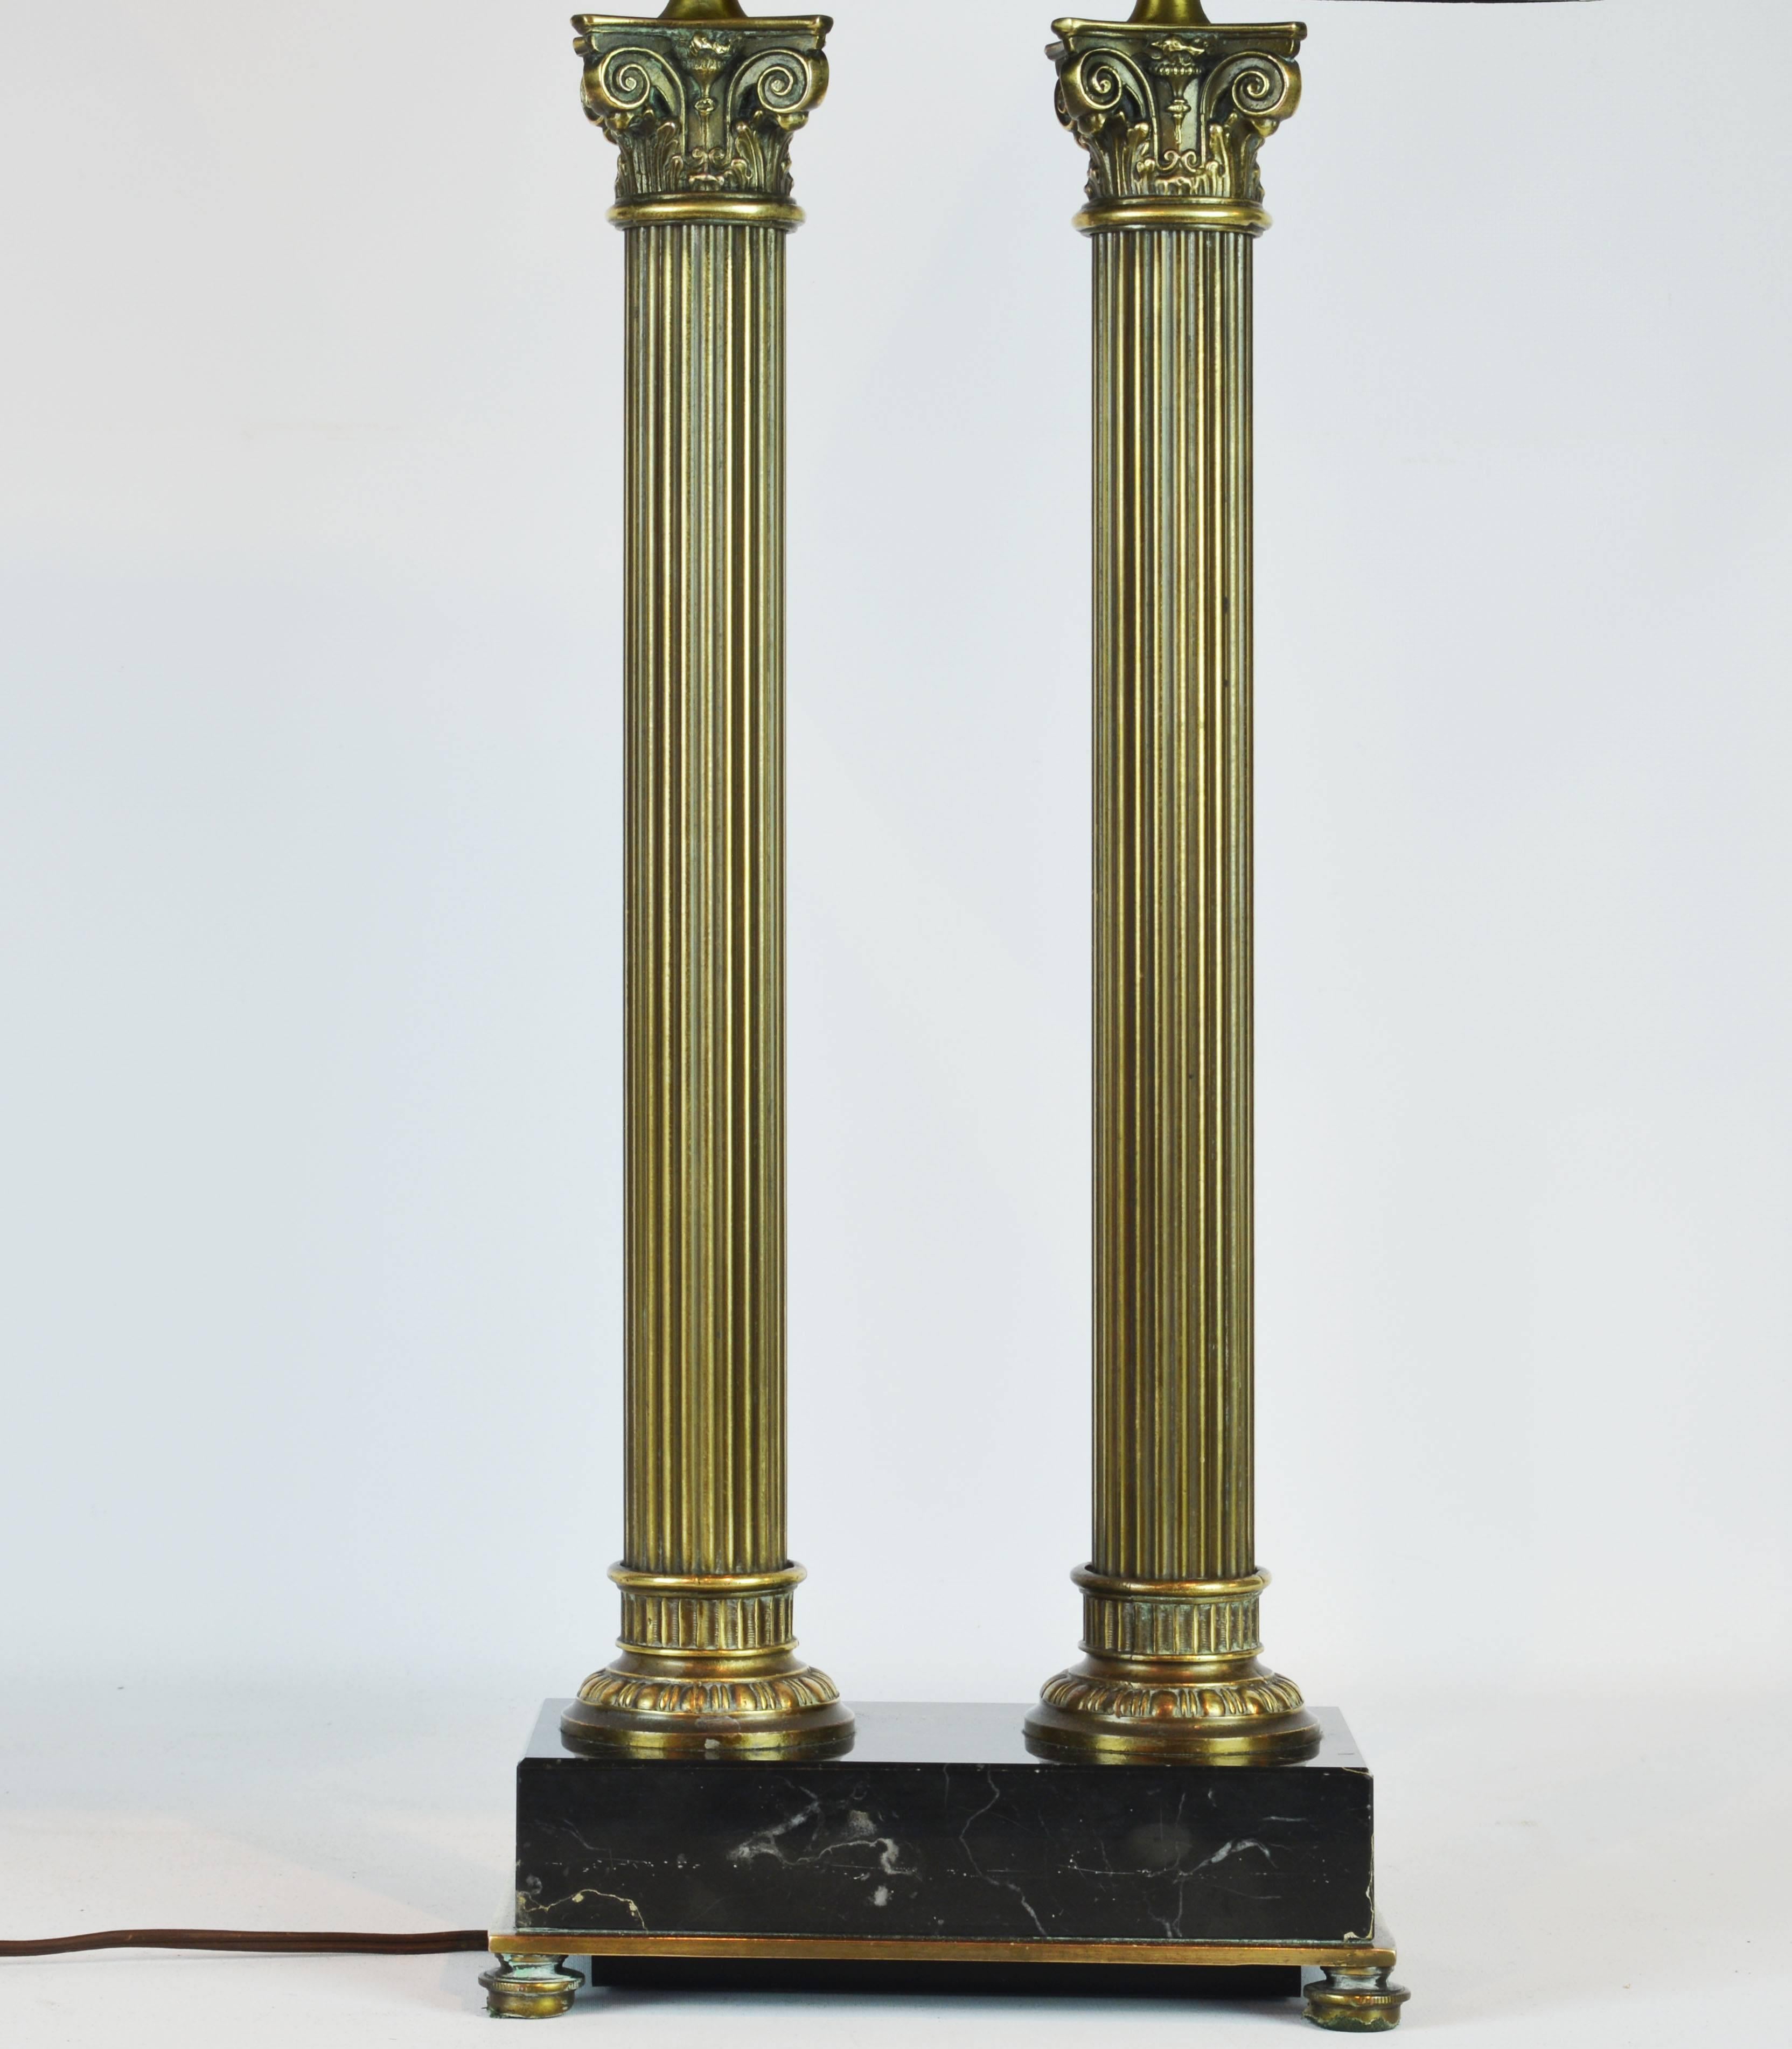 This French table lamp in the neoclassical architectural style features a bronze edged marquina marble base raised on bronze feet supporting two bronze columns surmounted by well detailed corinthian capitals. Measurements below are including the